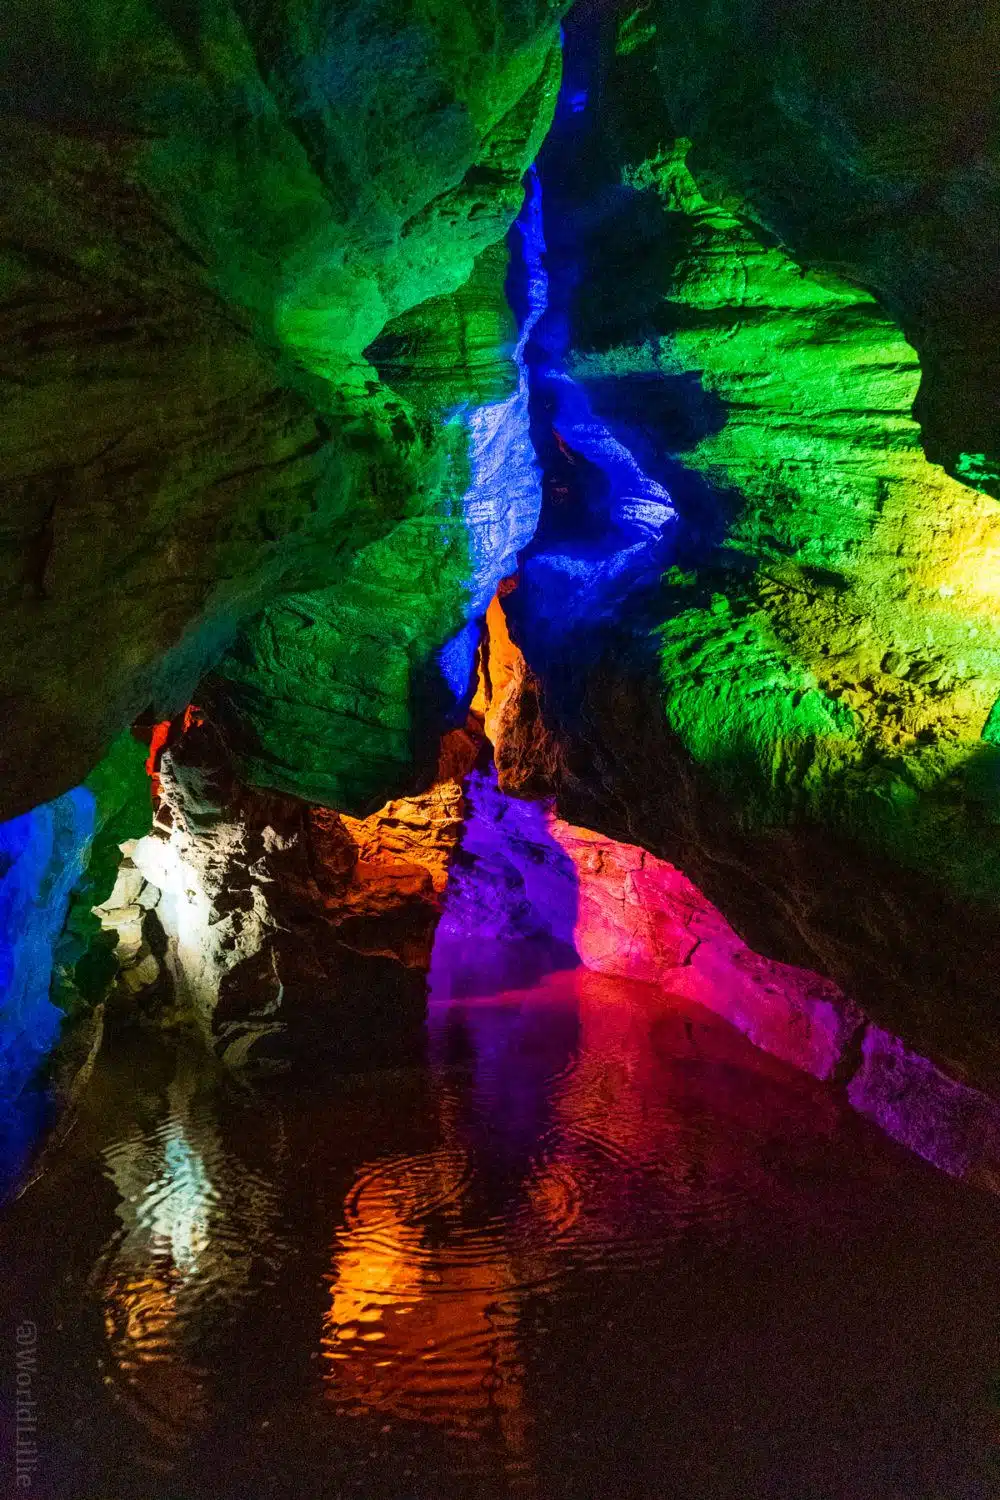 Laurel Caverns: lit with beautiful colored lights!